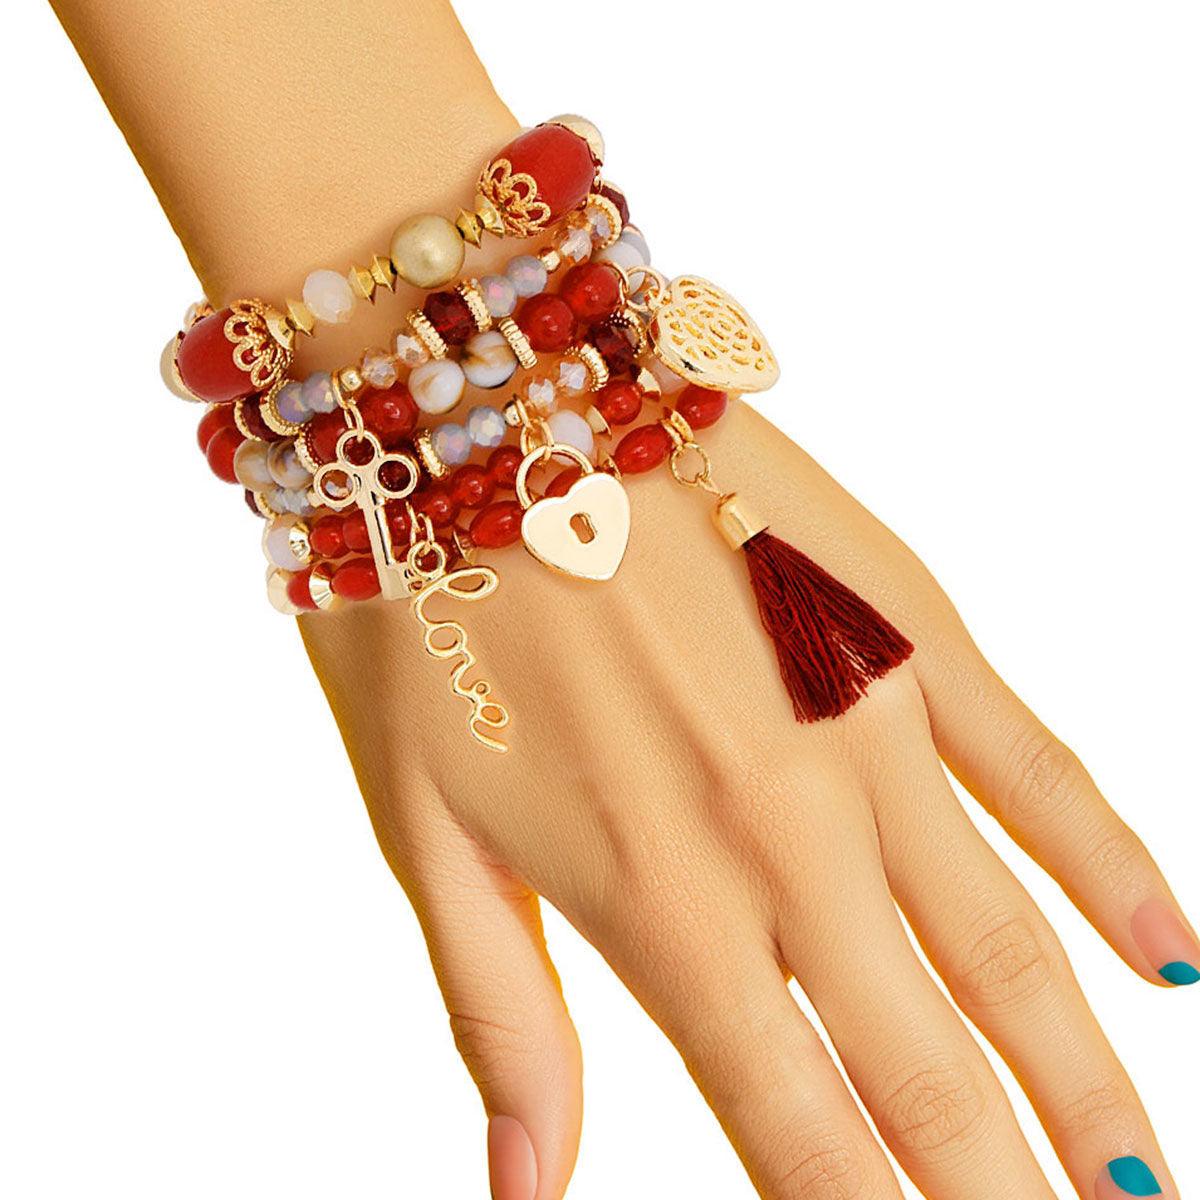 Shop the Best Burgundy-Red Bead Charm Bracelets Now